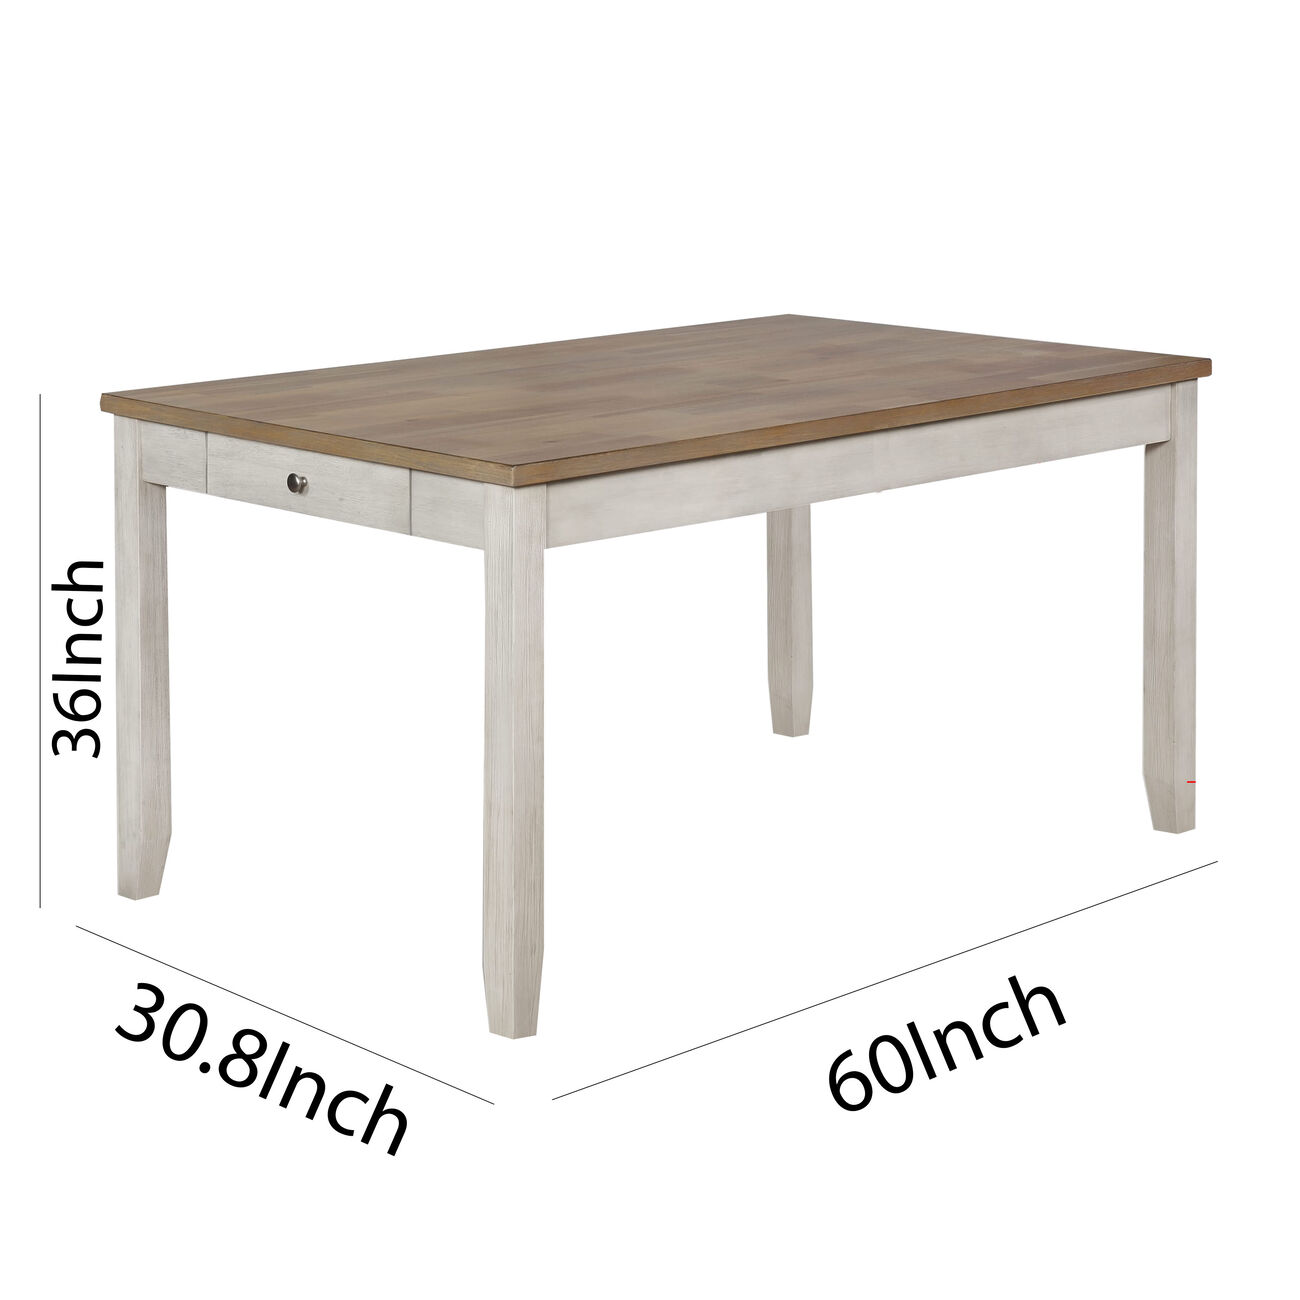 Wooden Dining Table with Side Drawer and Chamfered Feet, White and Brown